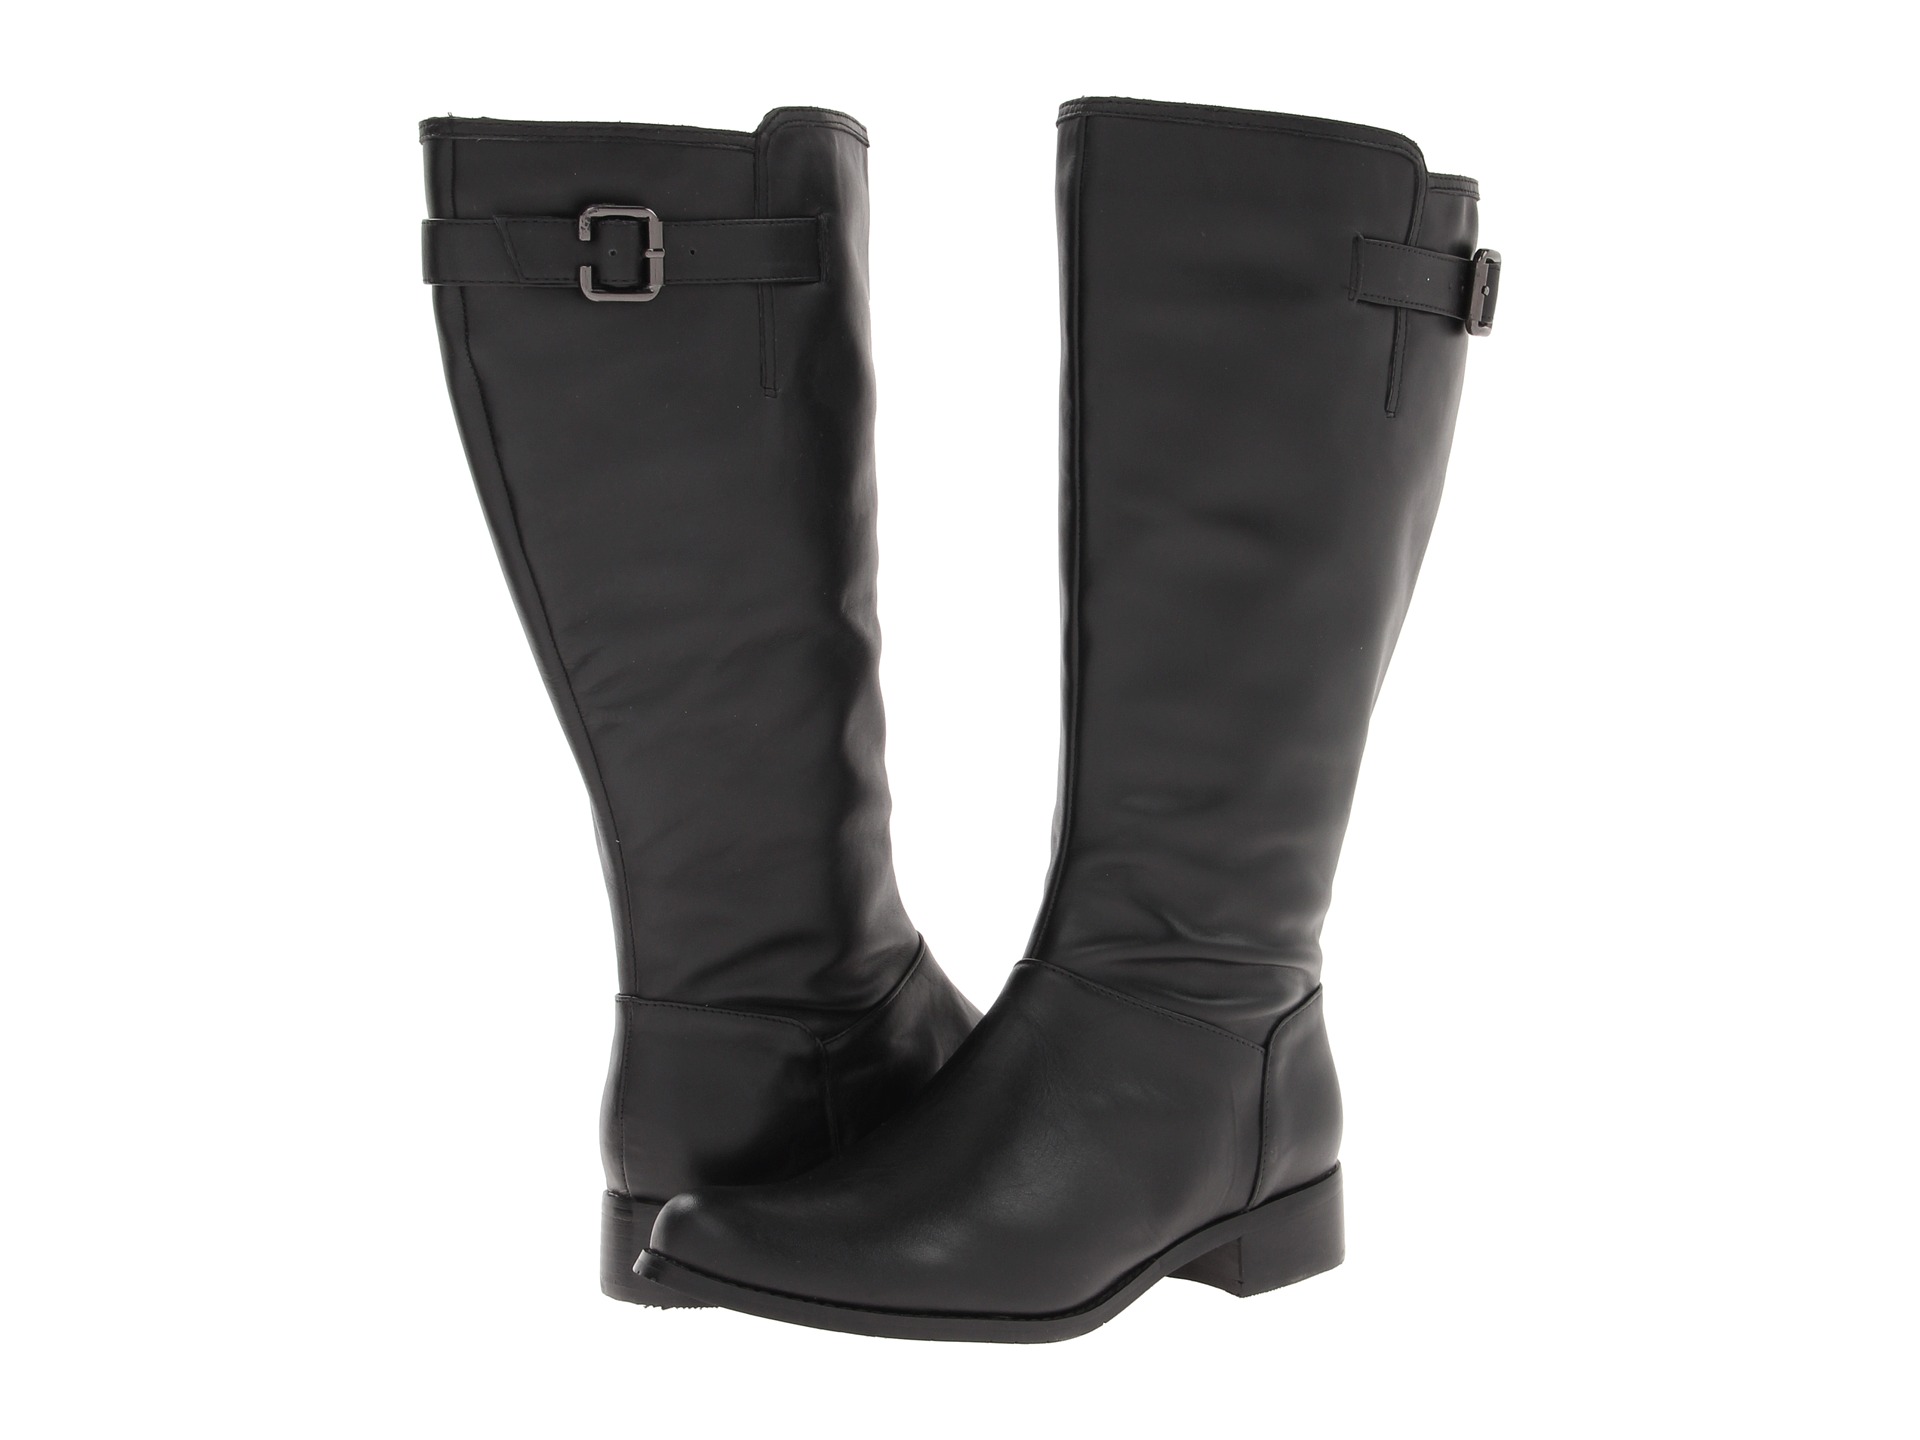 ... Lauren Wide Calf Riding Boot Black Calf | Shipped Free at Zappos